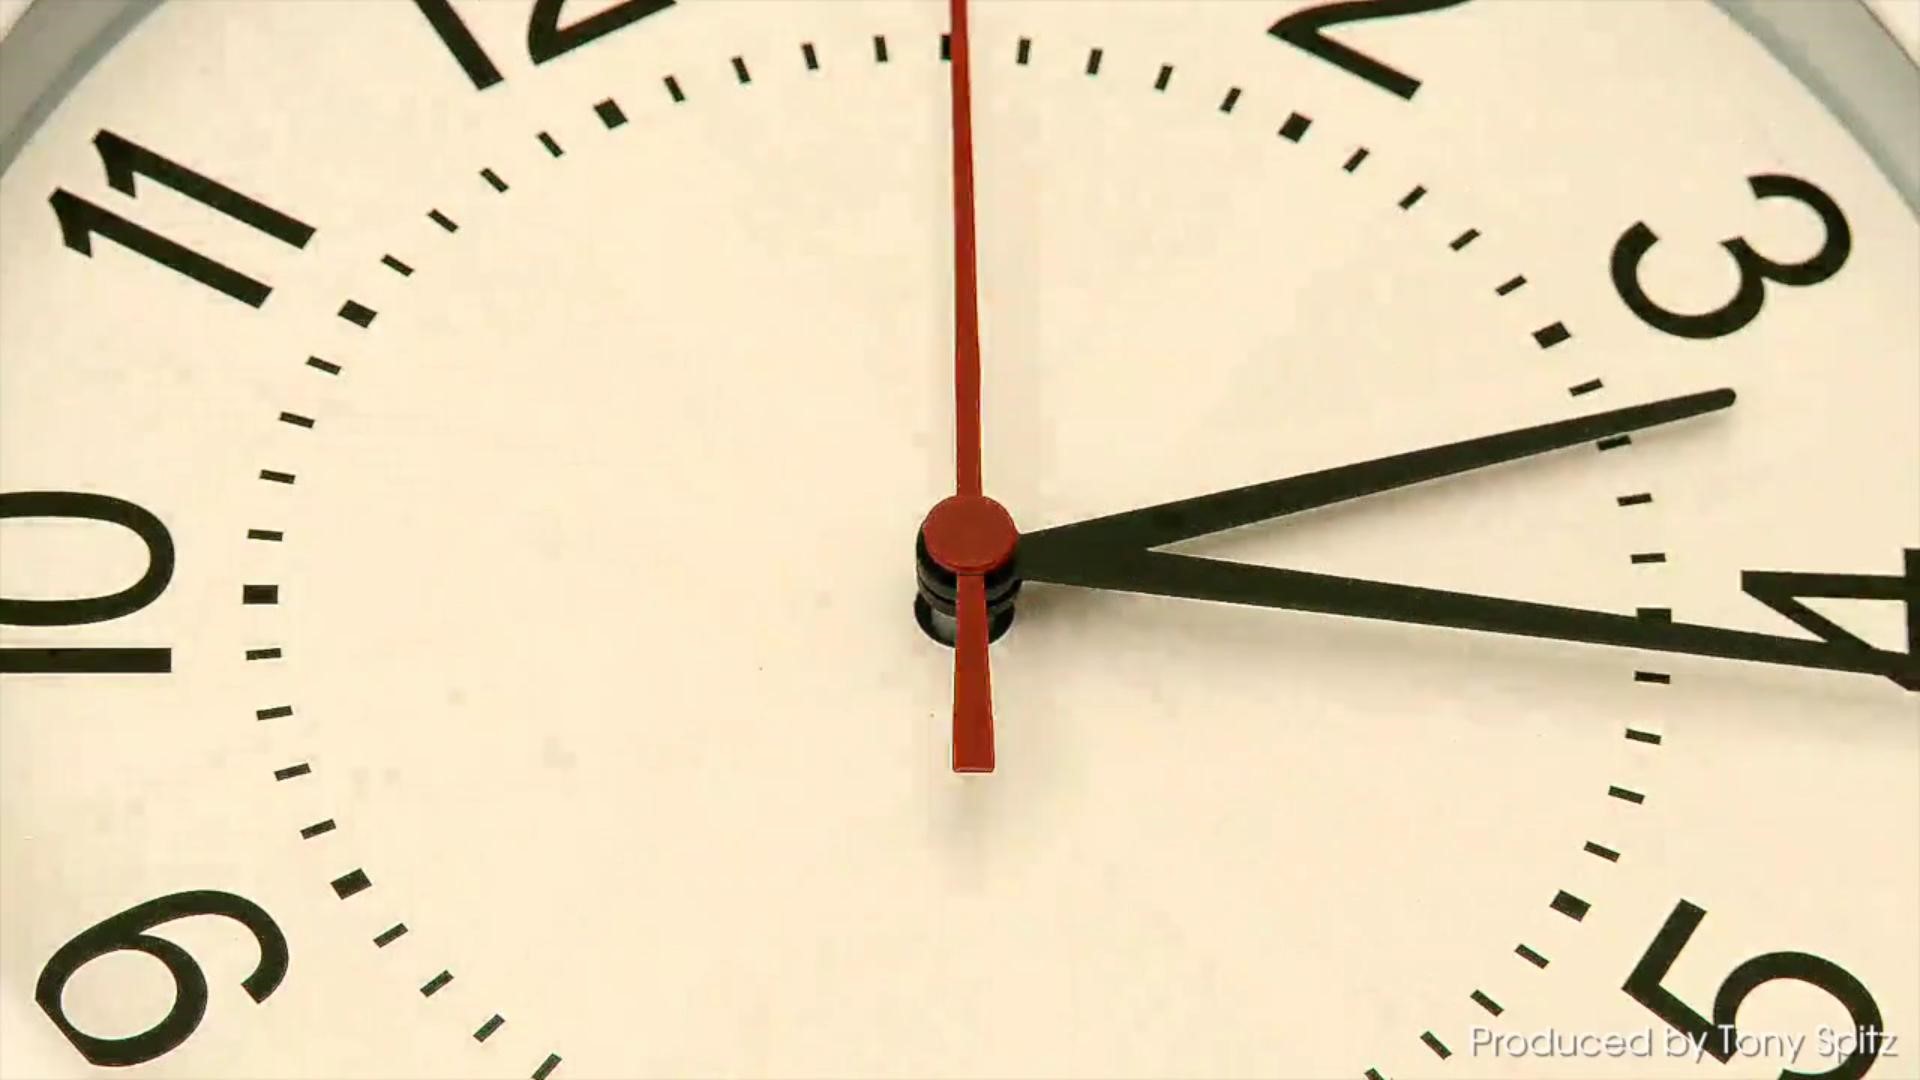 Daylight savings time has some unexpected consequences. Tony Spitz has the details.